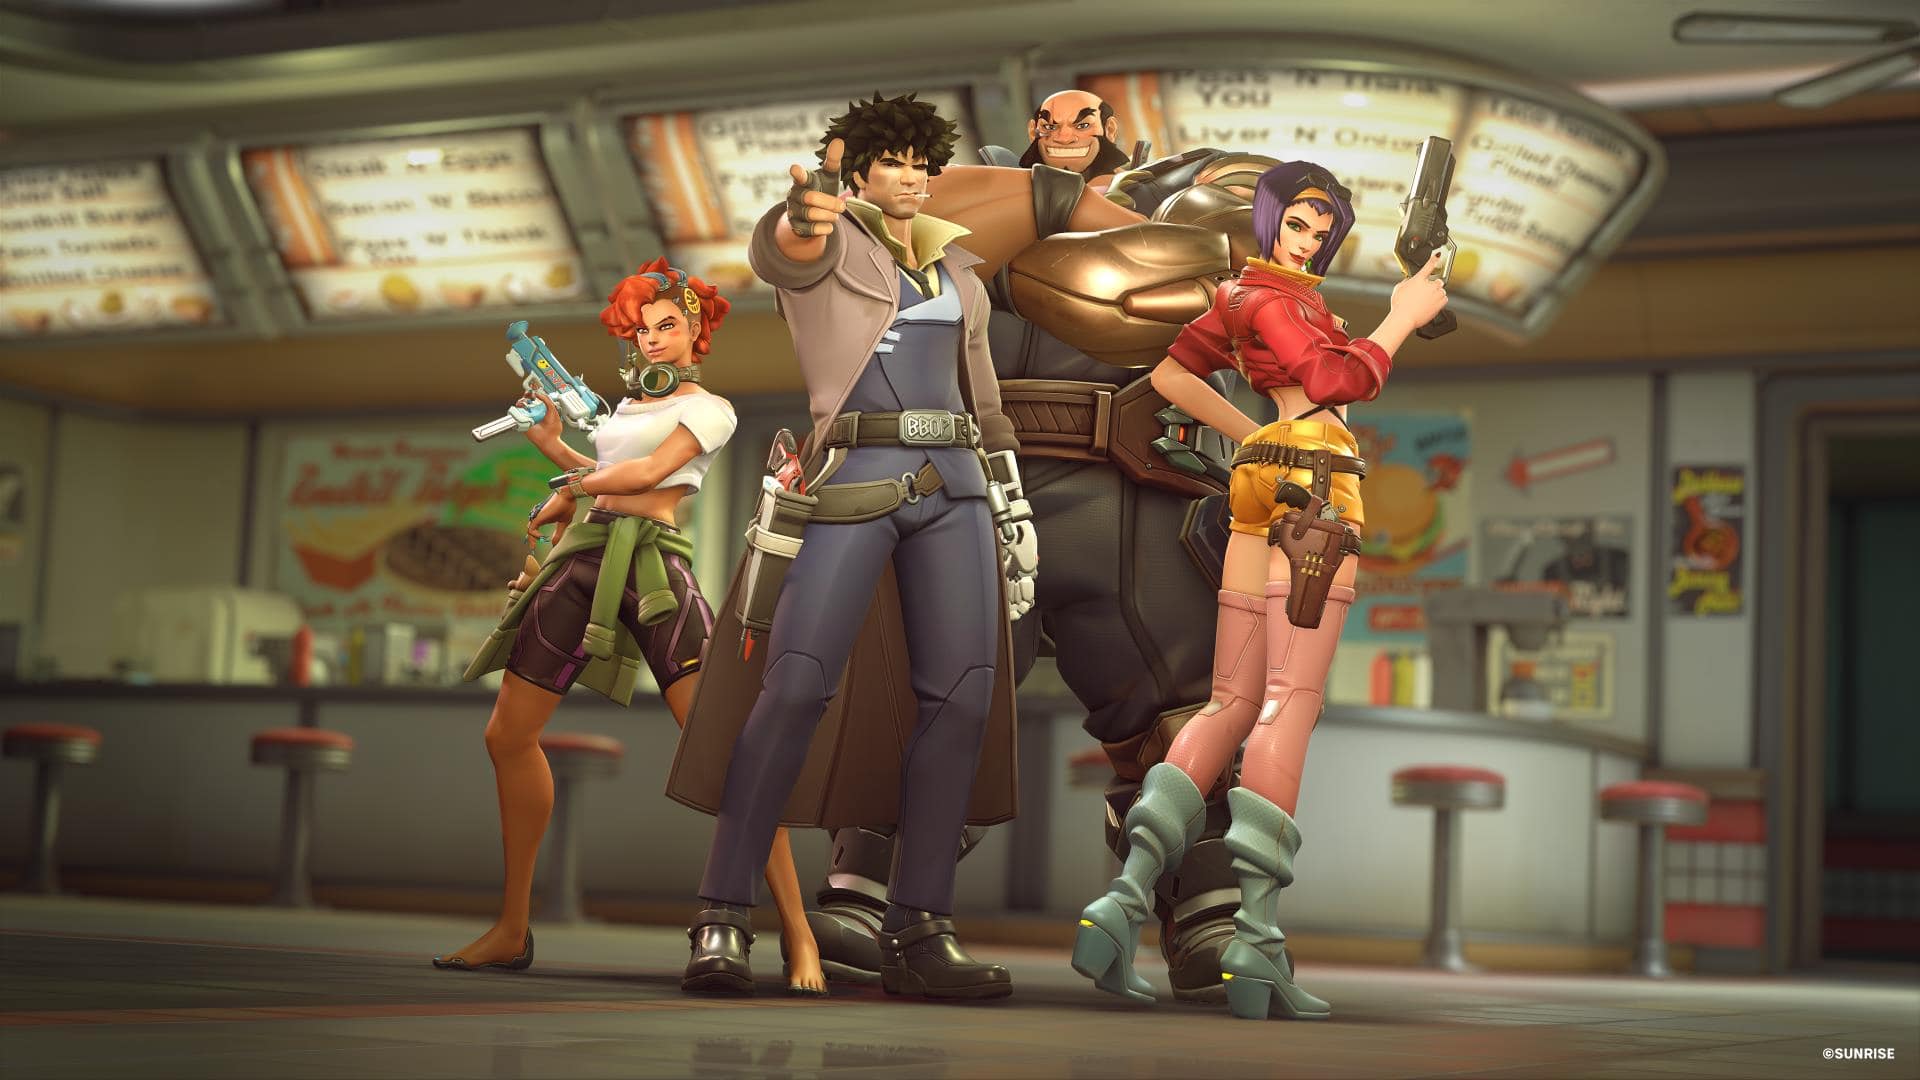 Here are the Overwatch 2 Cowboy Beebop Collaboration Skins and Gameplay Trailer!